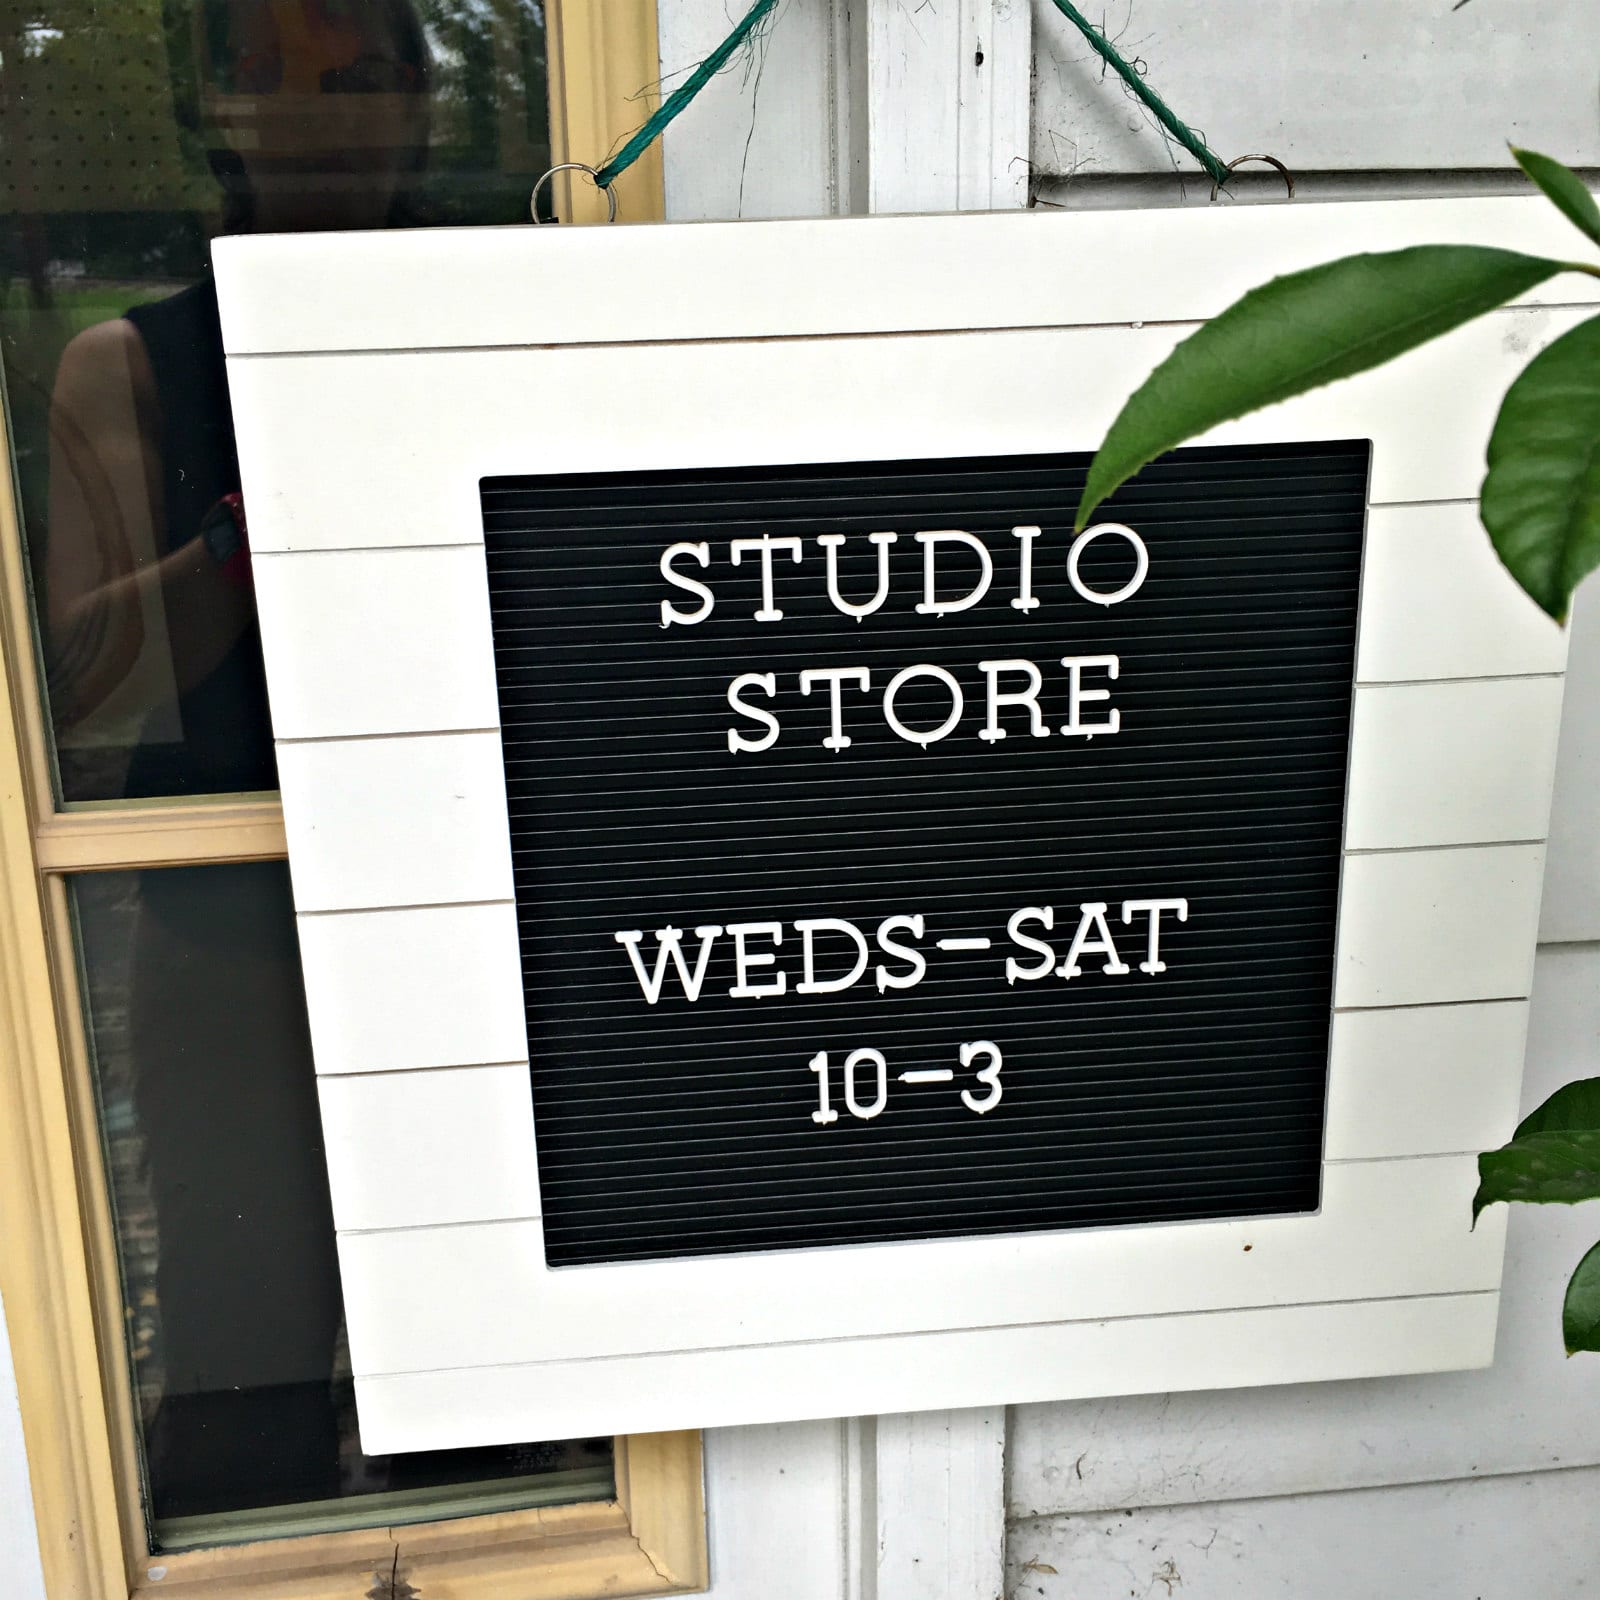 studiostore 1 Studio by the Tracks' Studio Store grand opening is July 27, 10-3 in Irondale. We can't wait!